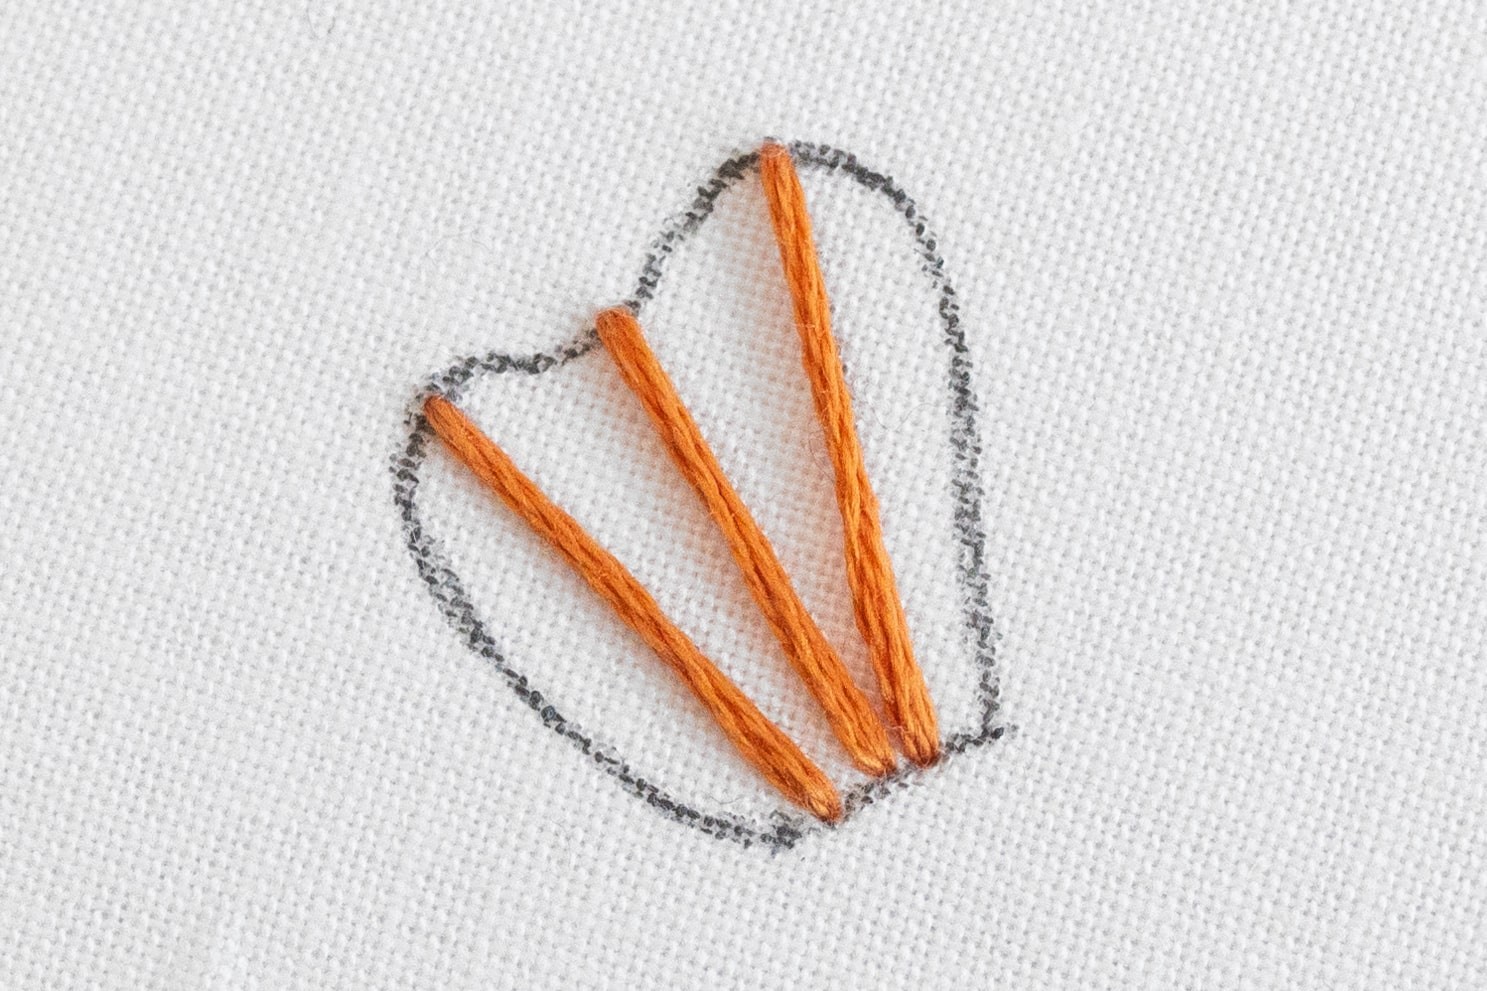 A few lines of satin stitch are across the lines on the petal.